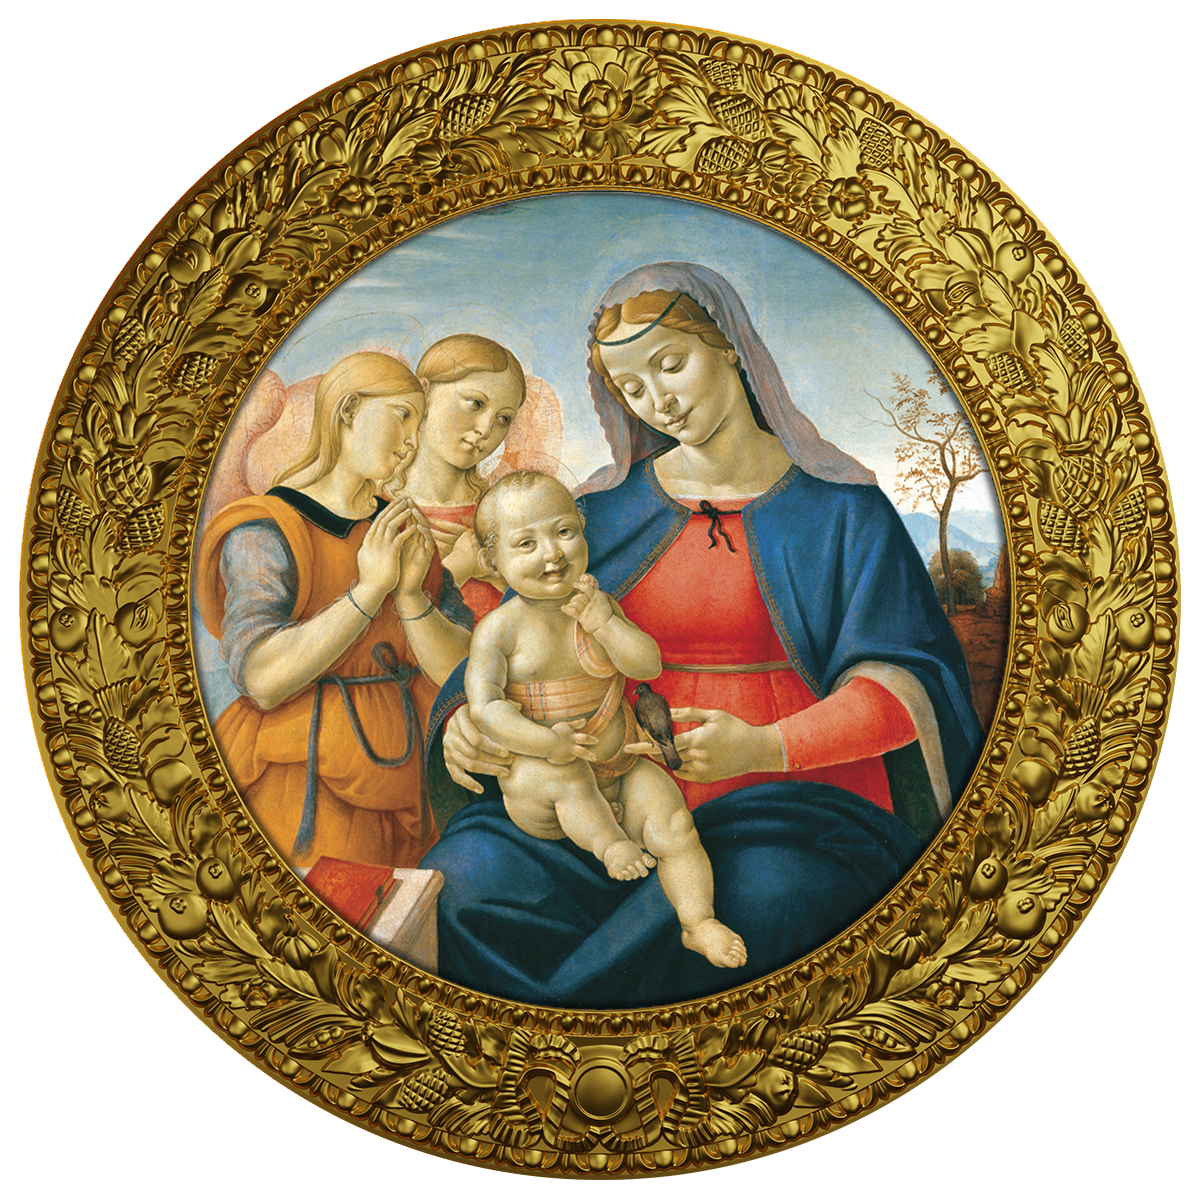 Cameroon - 2022 - 500 CFA Francs - Ave Maria Piero di Cosimo - The Virgin and Child with Angels